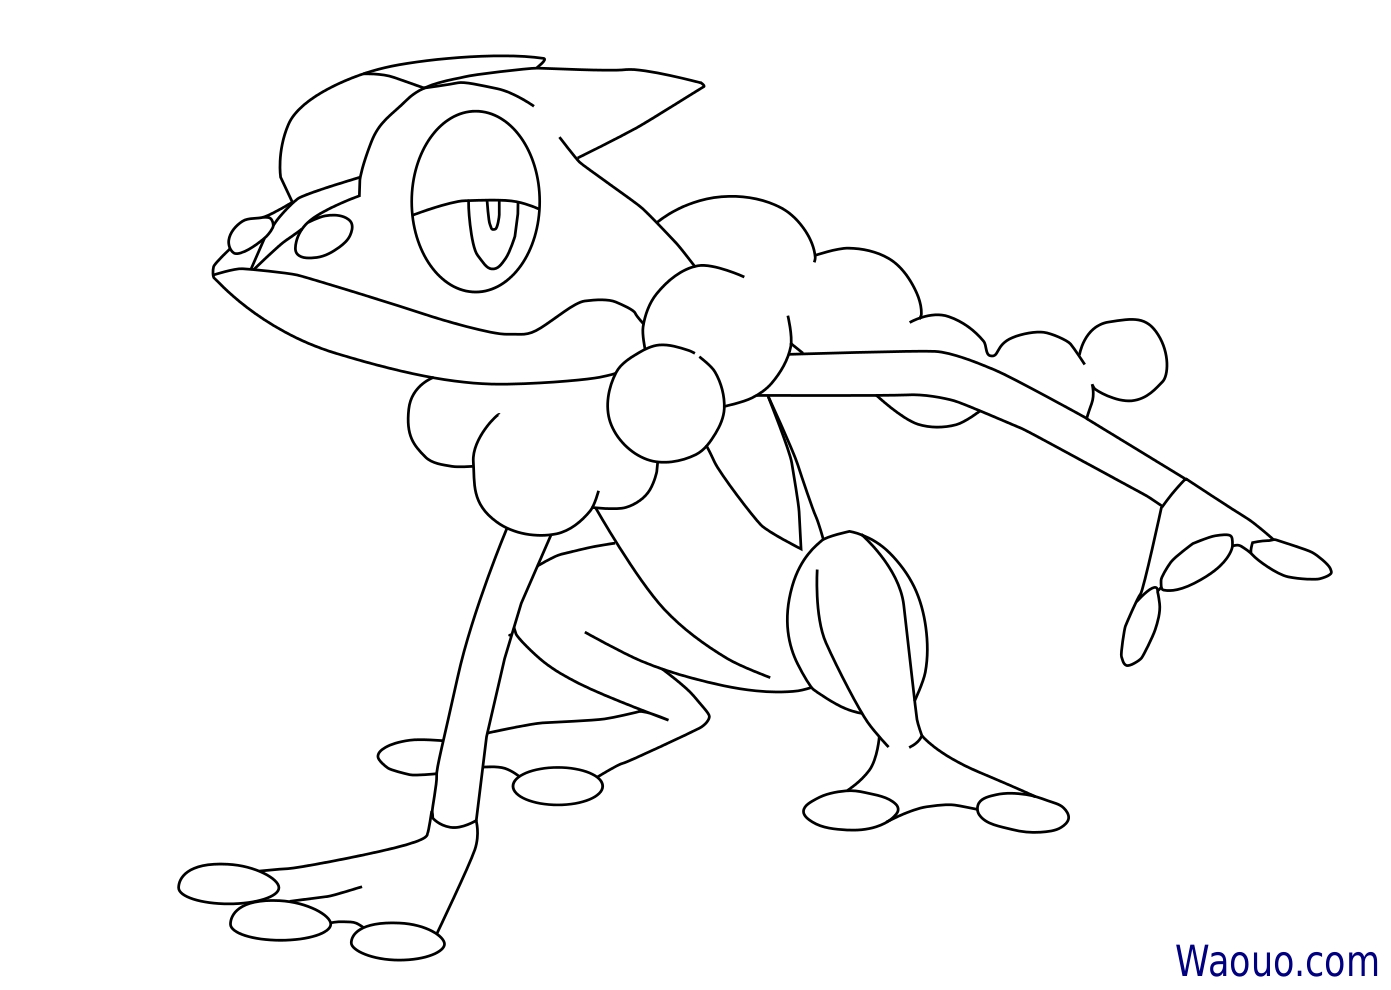 Pokemon Frogadier coloring page